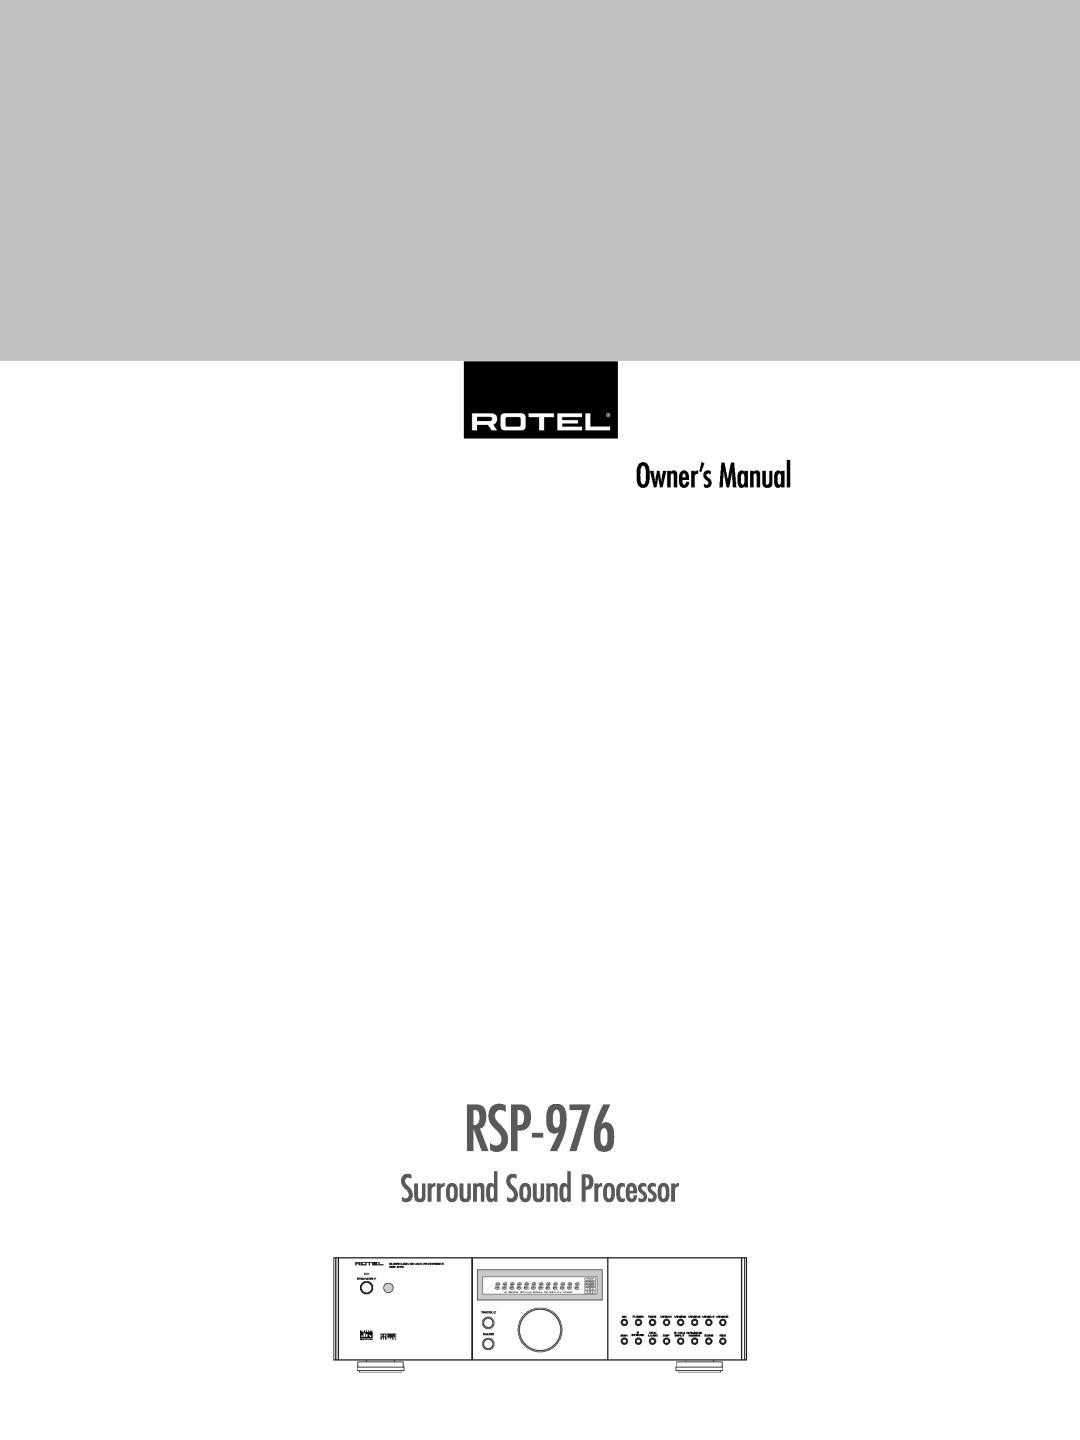 Rotel RSP-976 owner manual Surround Sound Processor, Standby, Rbds Rds, Optical Coaxial, Digital, Pro Logic 